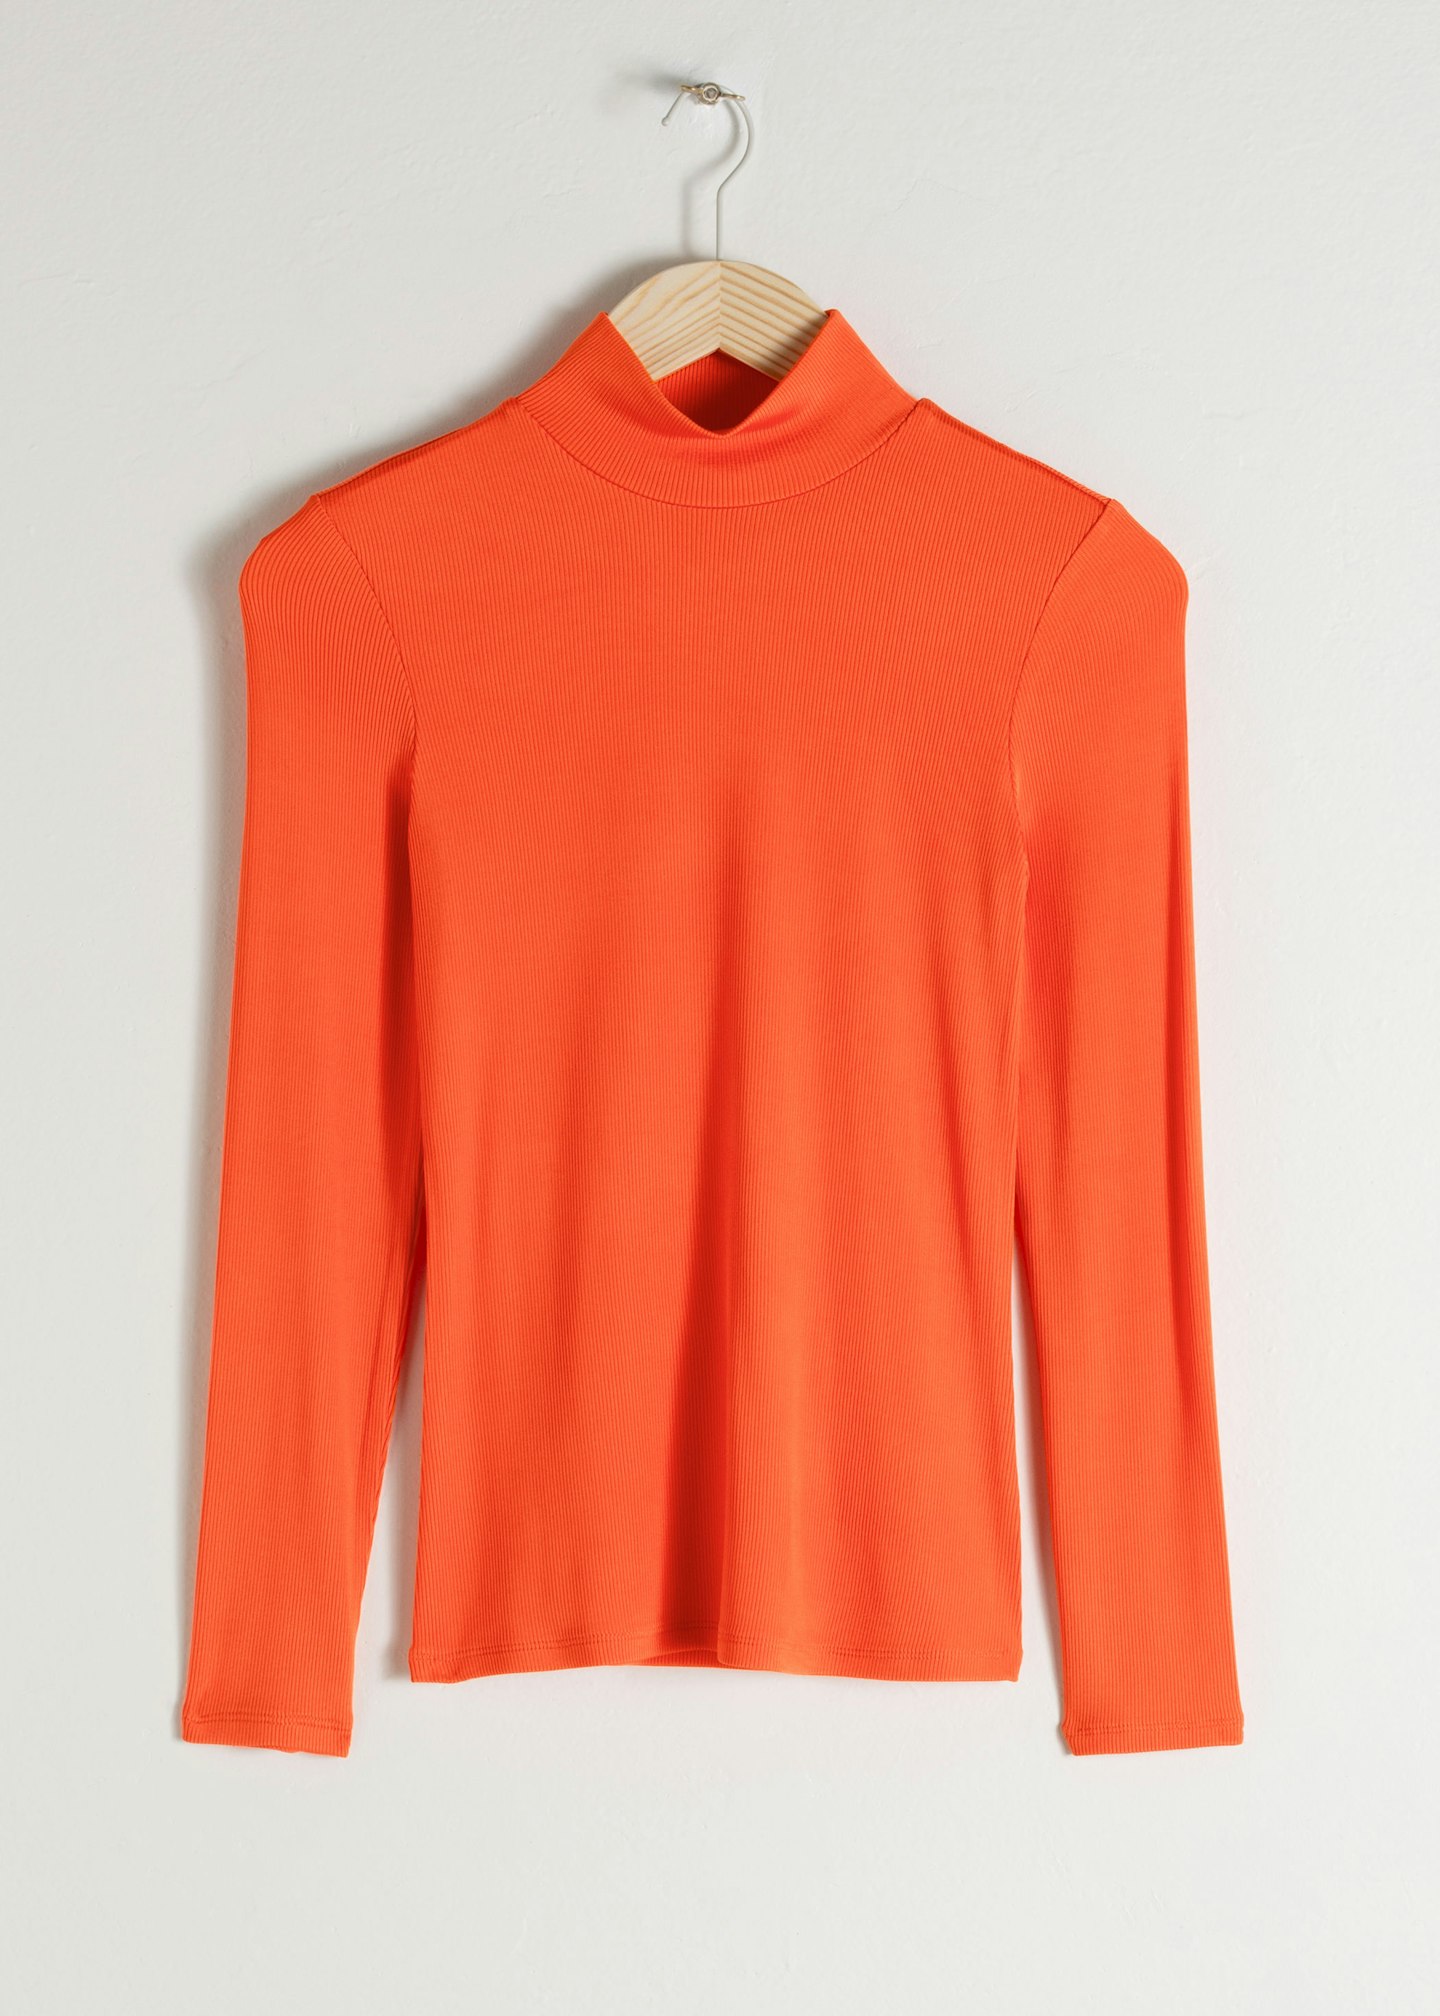 & Other Stories, Fitted Long Sleeve Turtleneck, £27